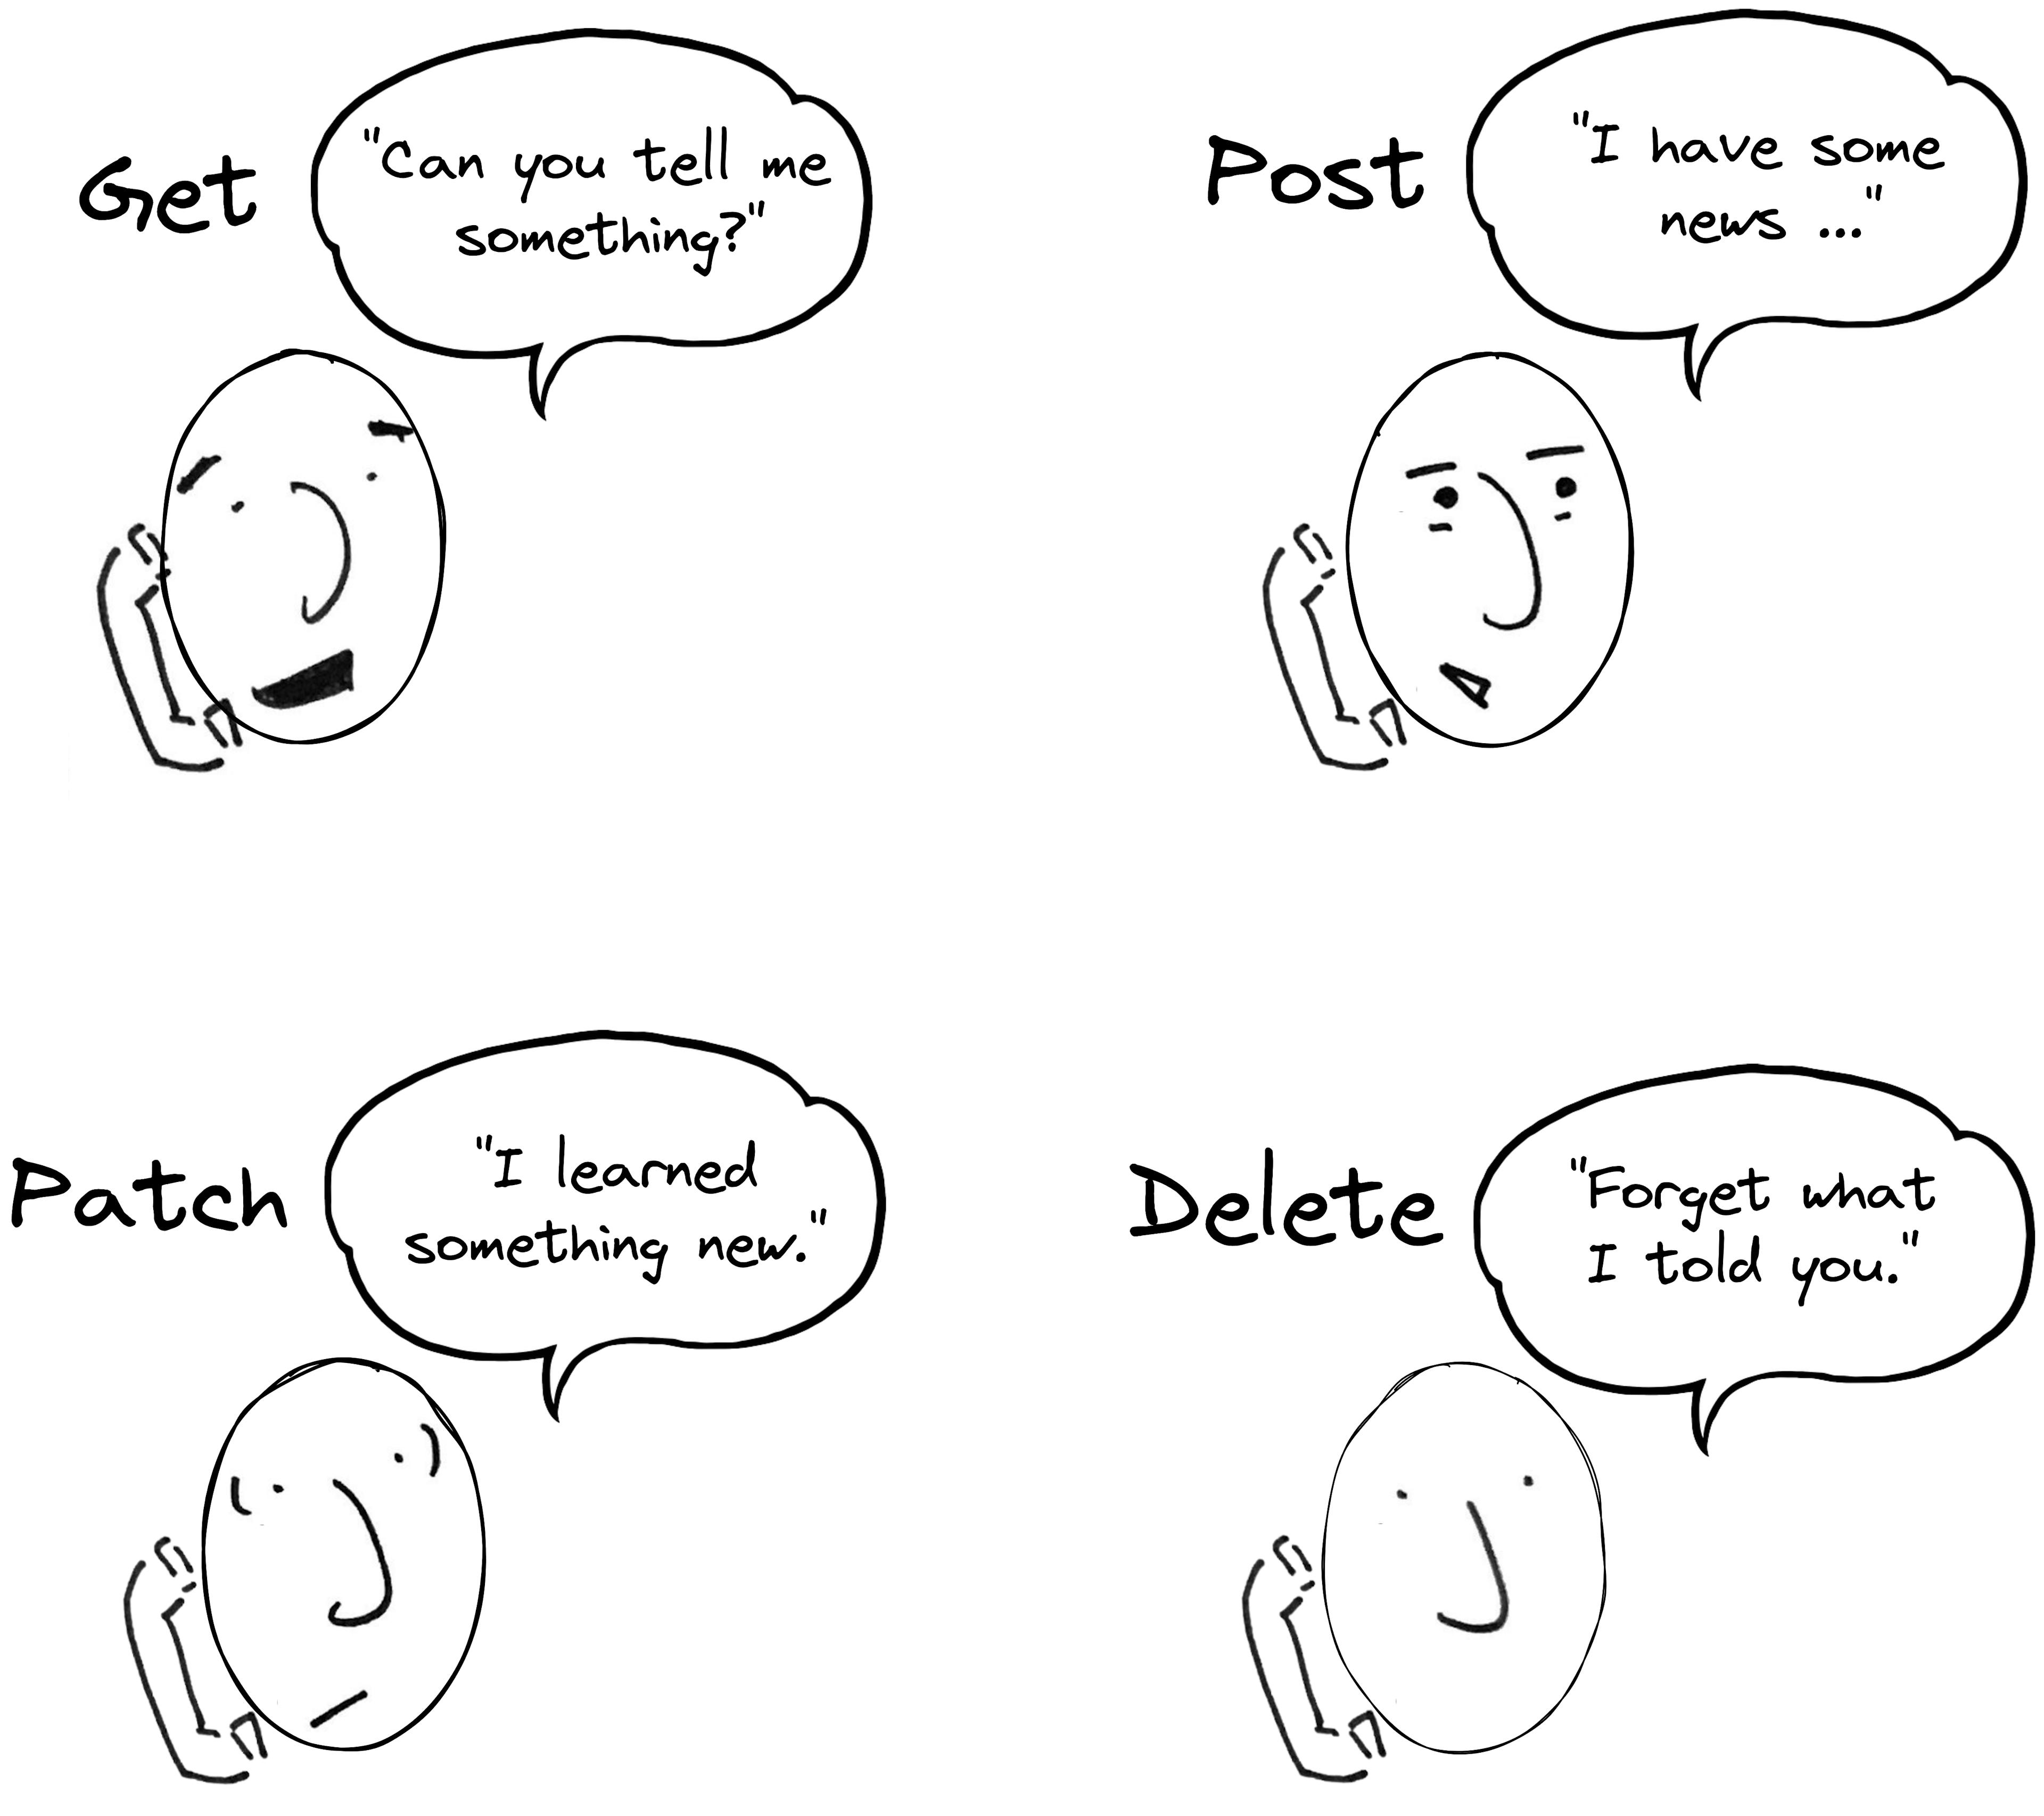 A drawing that represents the four types of API requests: GET, POST, PATCH, and DELETE. If you called a friend on the phone, a GET request would be like saying, "Can you tell me something?" A POST request would be like saying "I have some news to share." A PATCH request would be like saying, "I learned something new." And a DELETE request would be like saying, "Foret what I told you!"